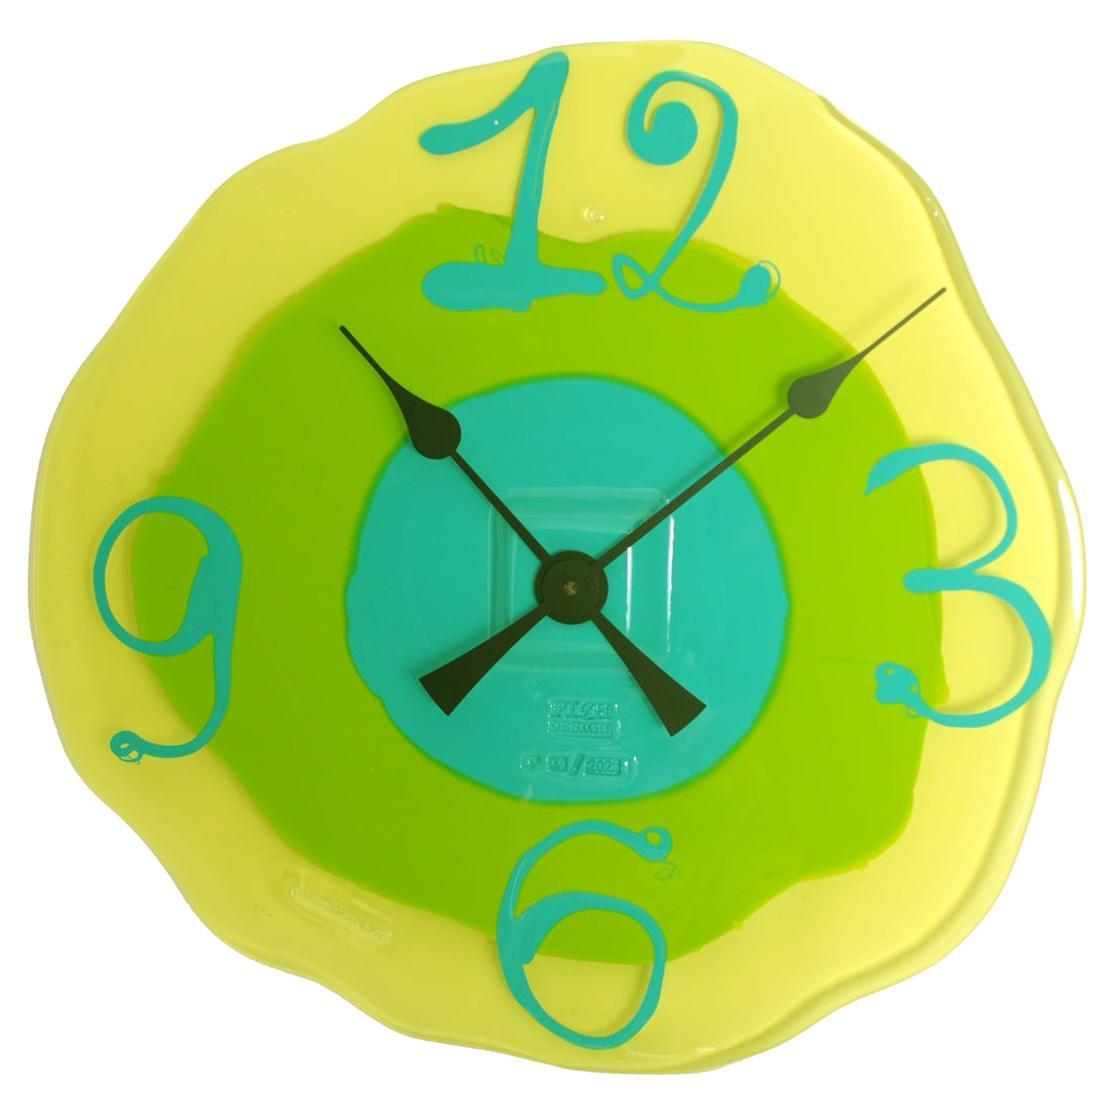 Watch Me Clock Large Clear Yellow Matt Lime Matt Turquoise by Gaetano Pesce For Sale